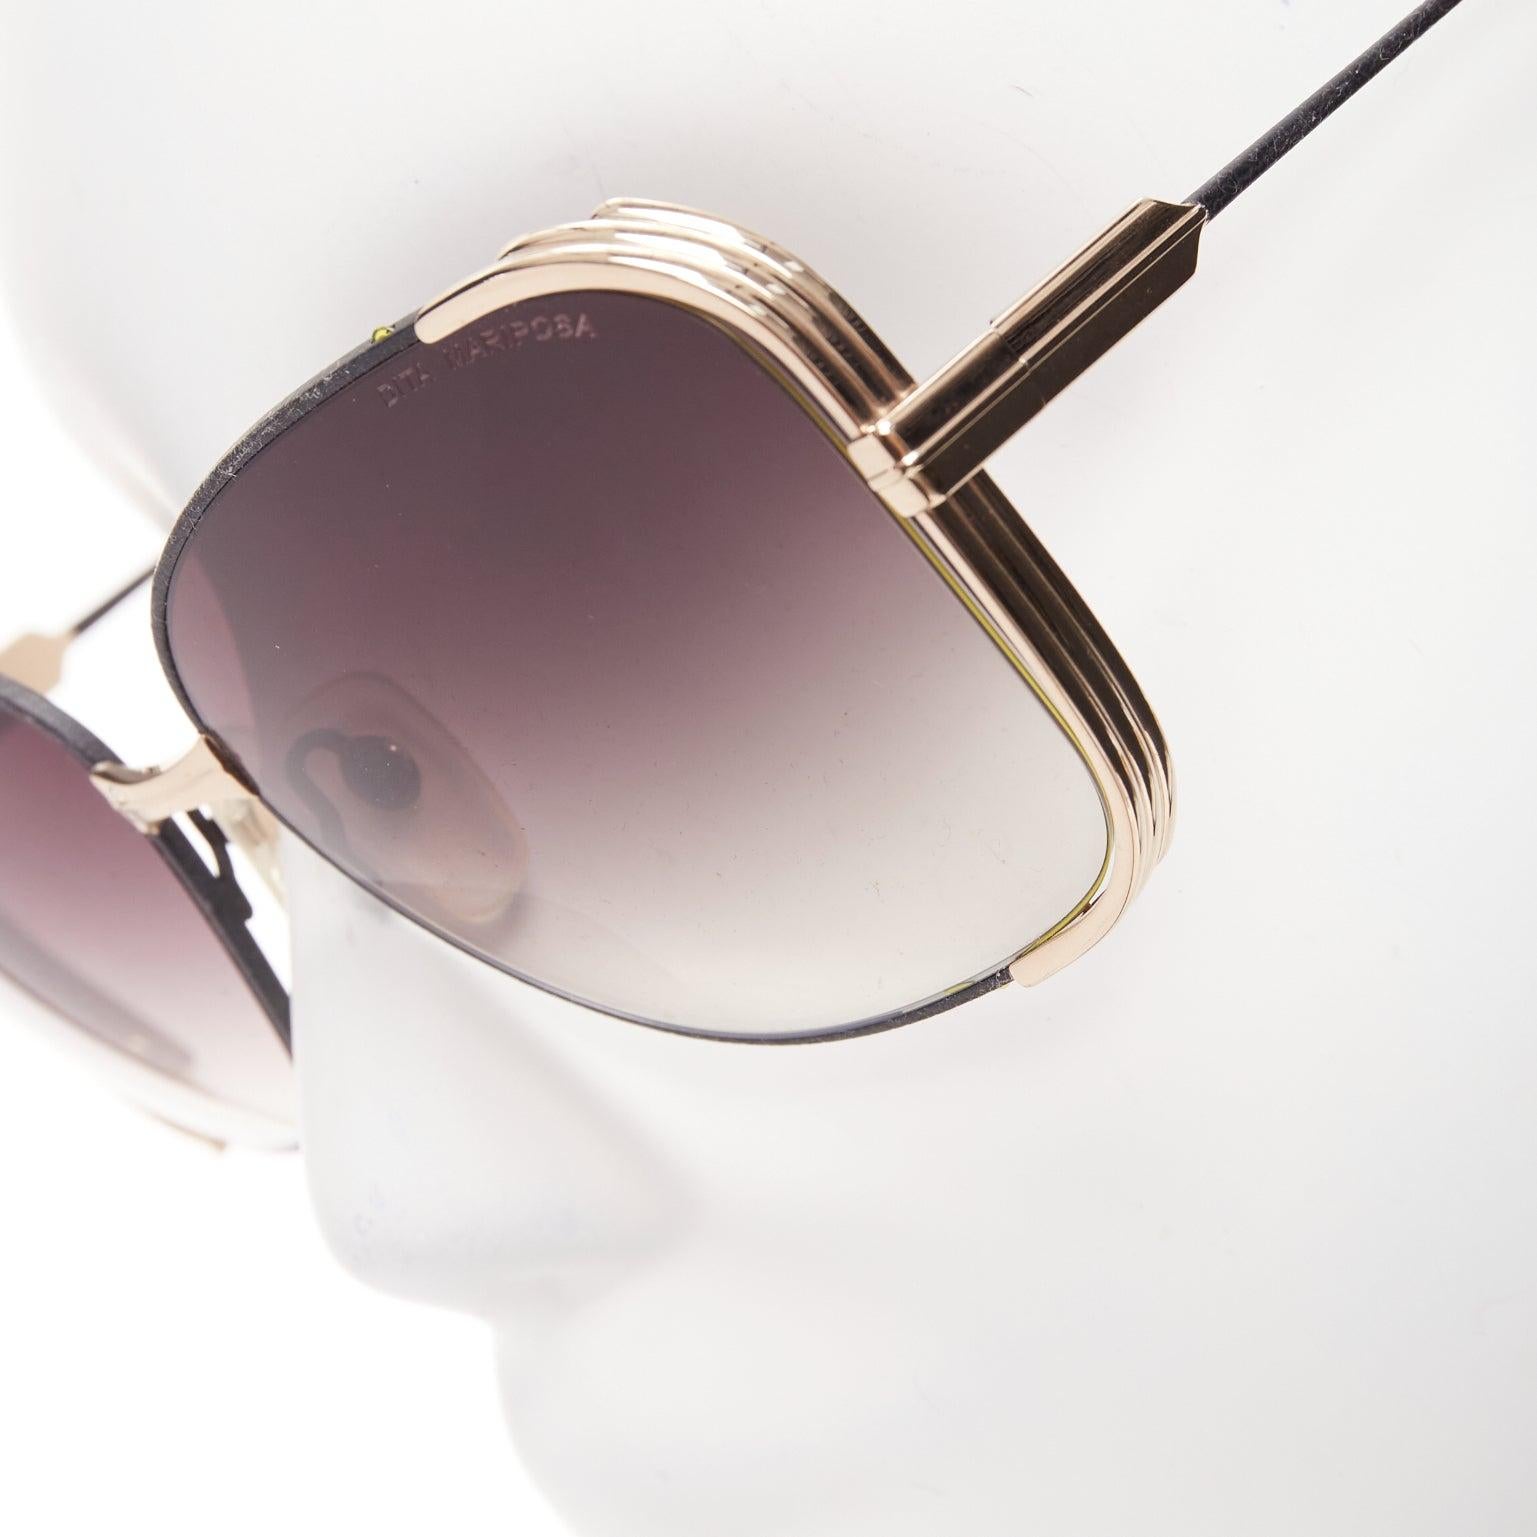 DITA Mariposa black gold metallic sides frame logo end butterfly sunnies
Reference: AAWC/A01014
Brand: Dita
Model: Mariposa
Material: Metal, Leather
Color: Black, Gold
Pattern: Solid
Lining: Black Leather
Extra Details: Black leather arms and